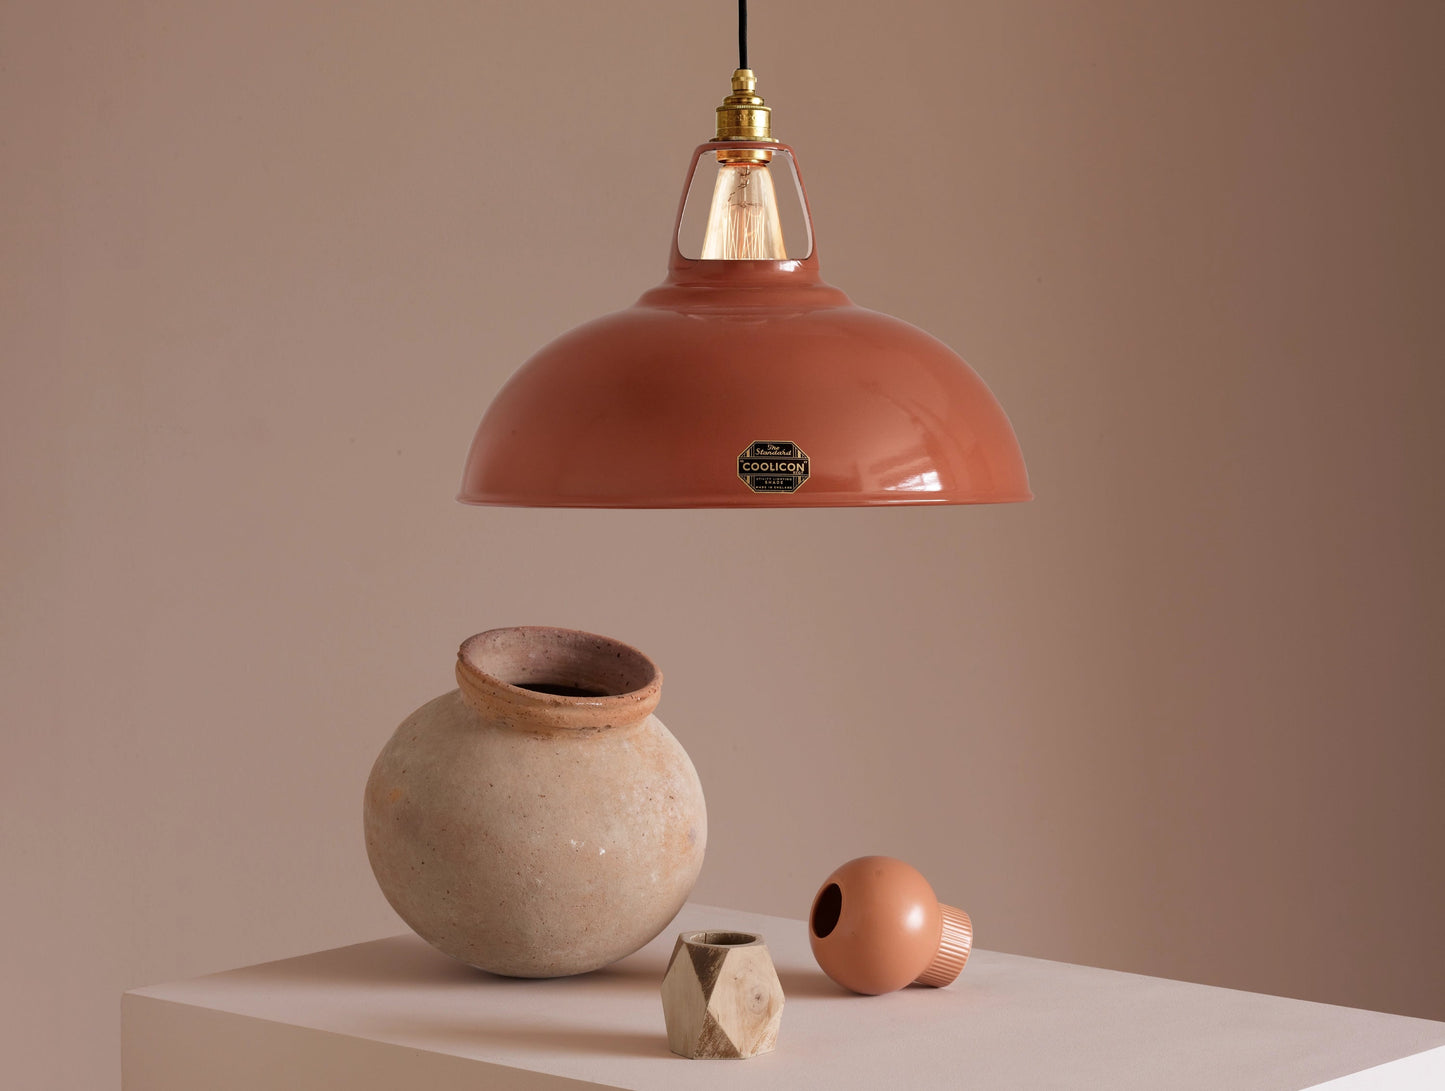 A Large Coolicon Terracotta lampshade hanging over a plinth. Below the shade is a large terracotta amphora, a small orange flower vase and a small wooden vase